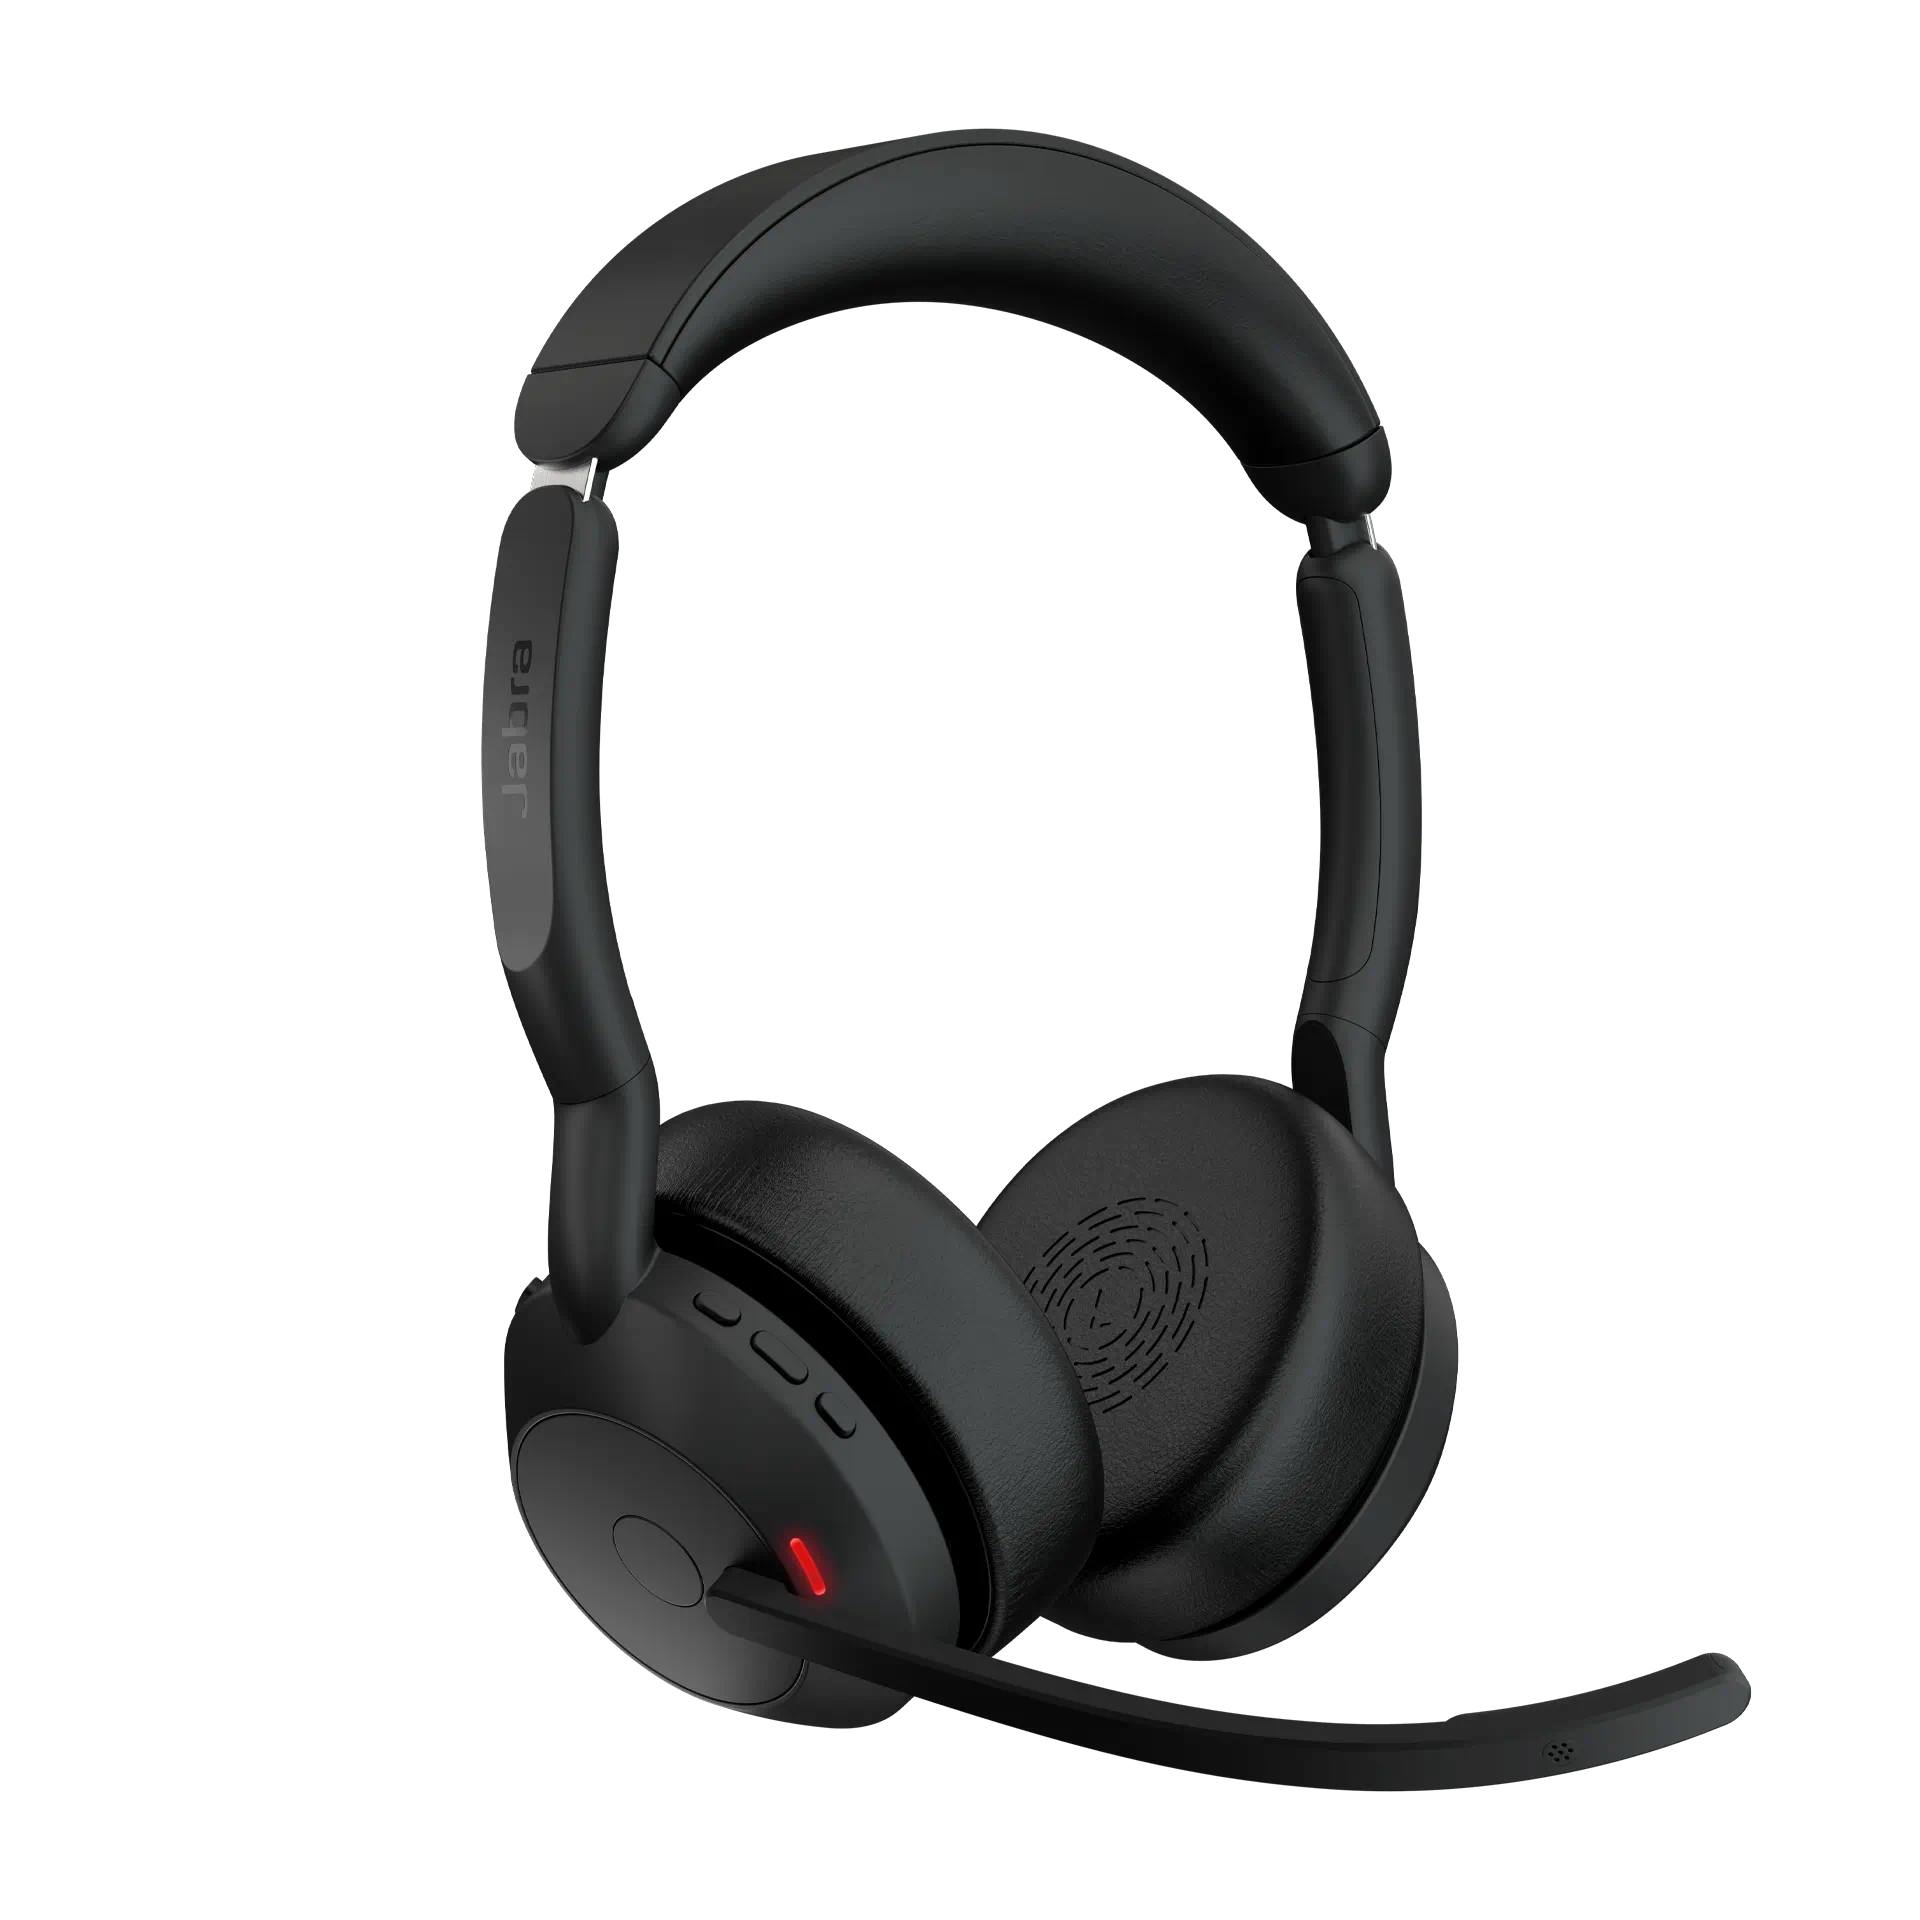 Professional all-rounder headset for hybrid working